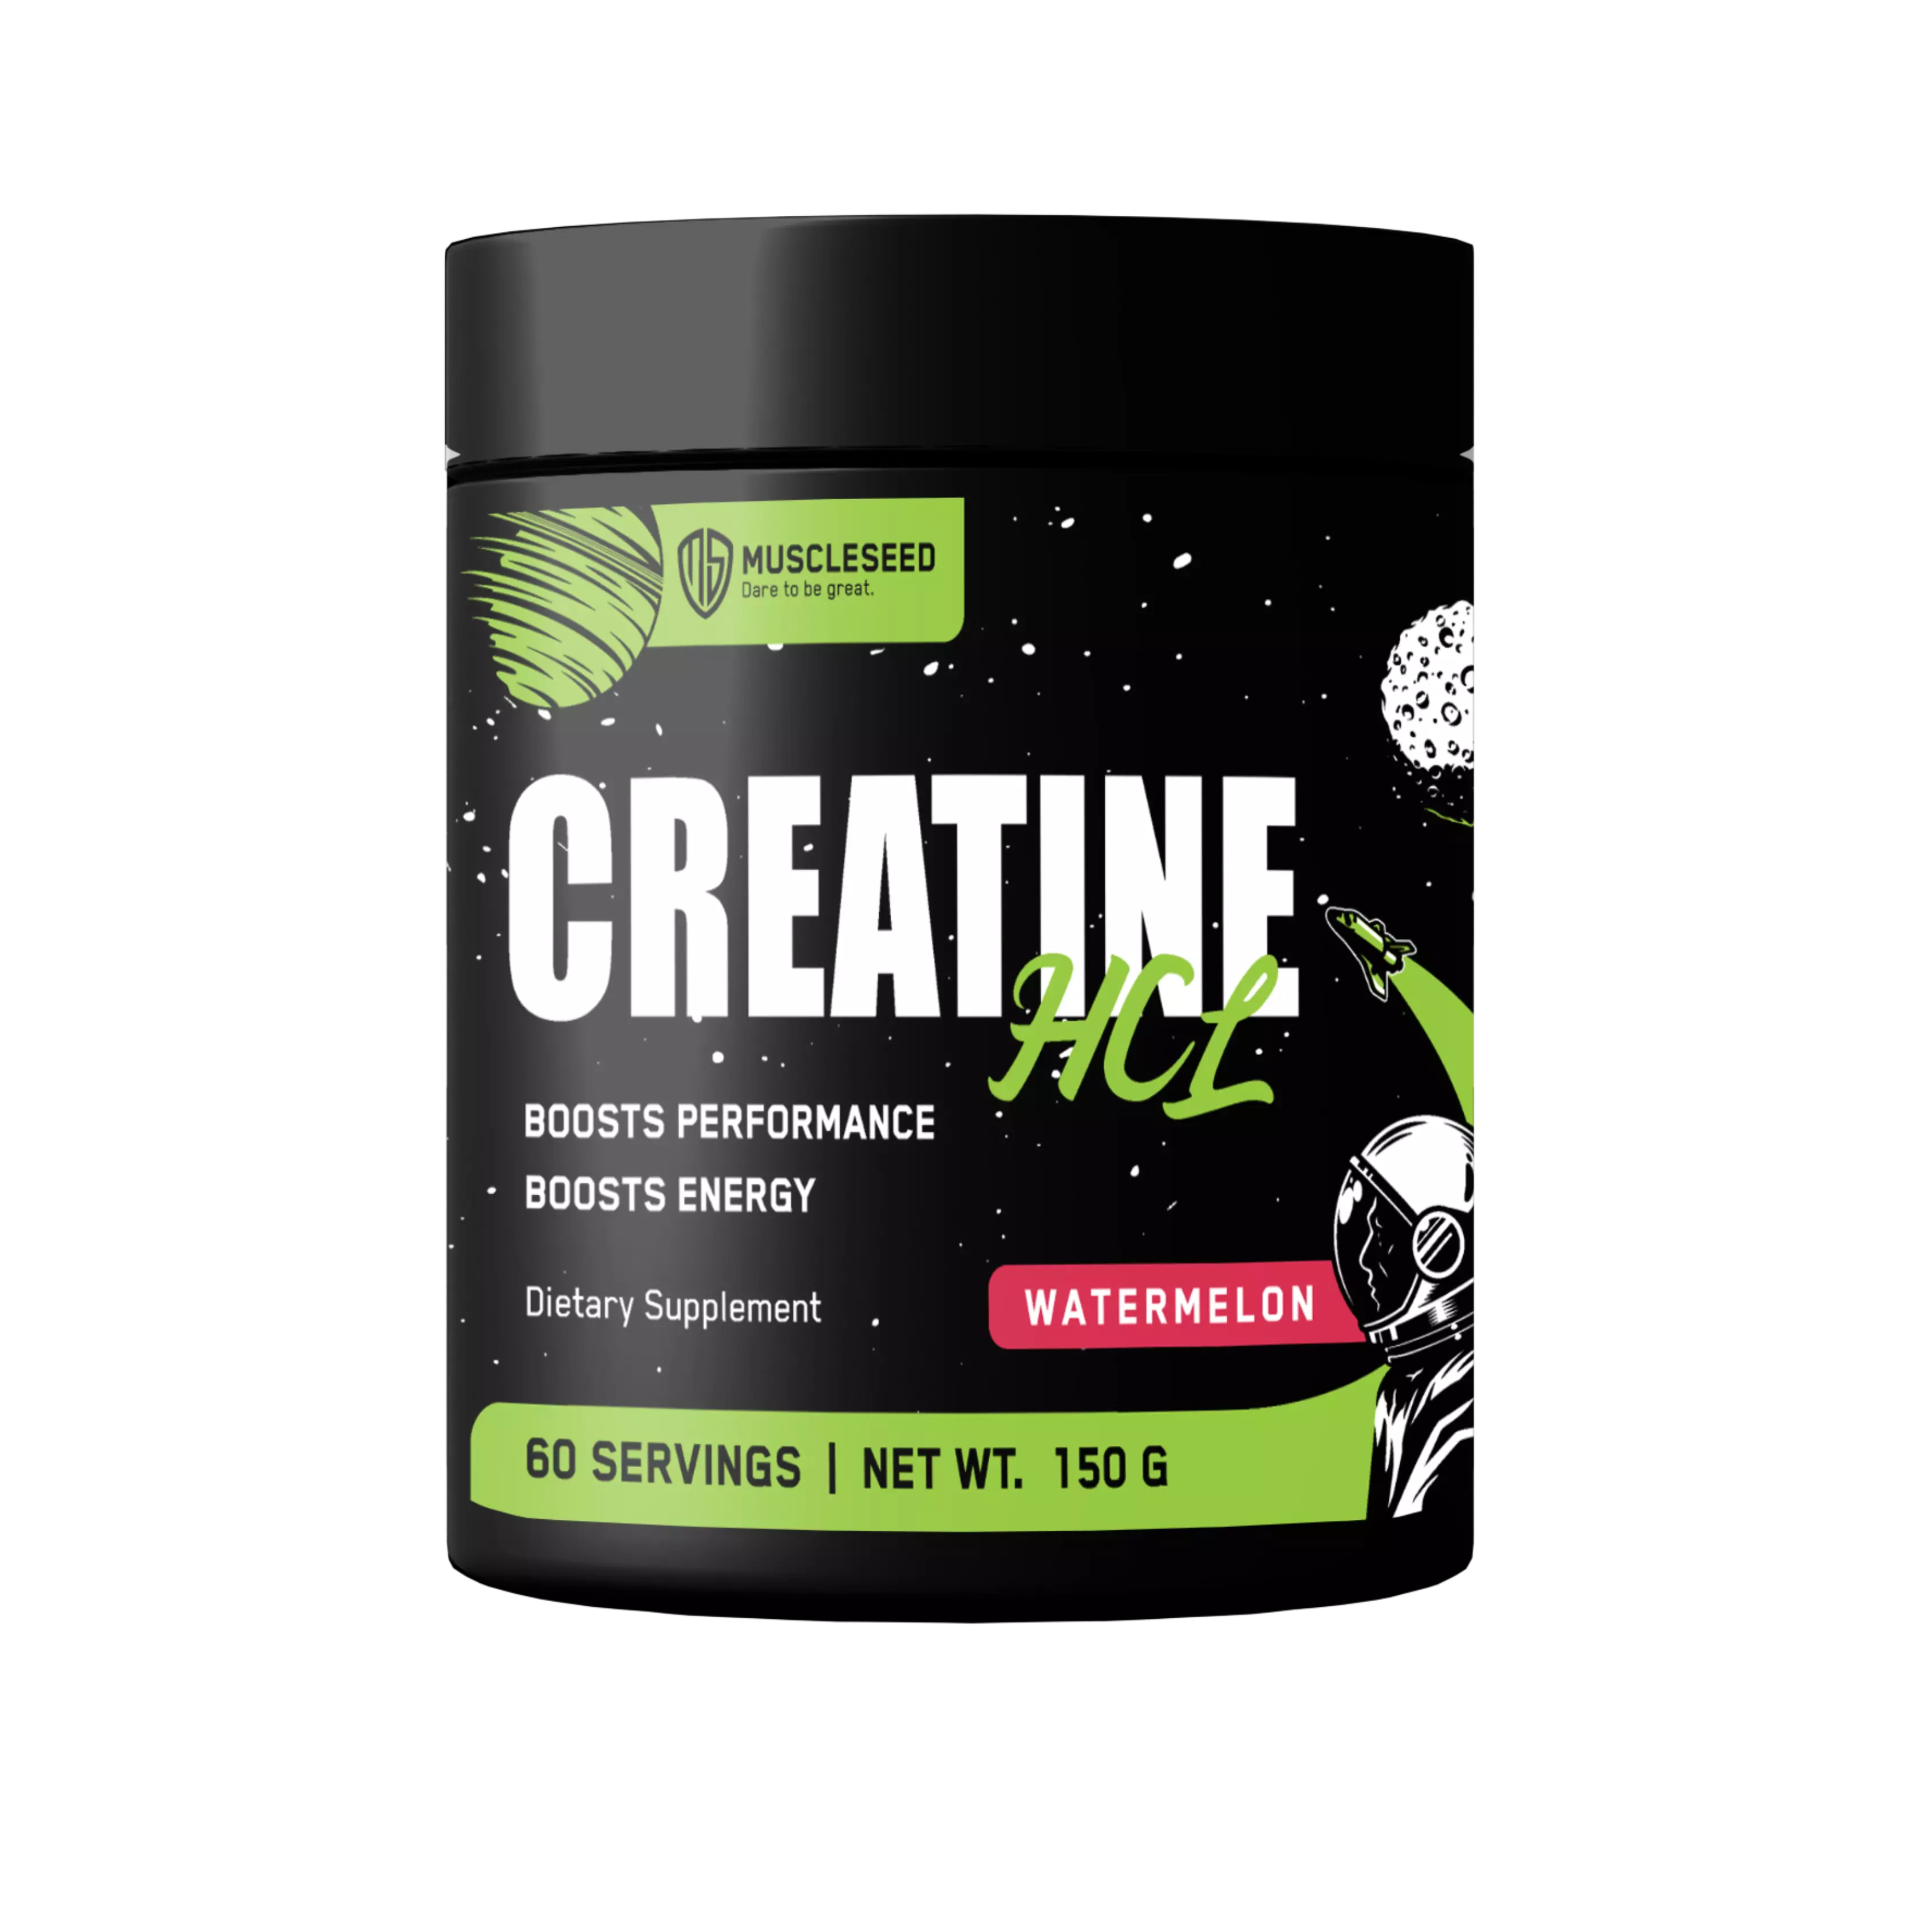 <h3><strong><span style="color: #000000ff">CREATINE HCL 60 SERV</span></strong></h3>